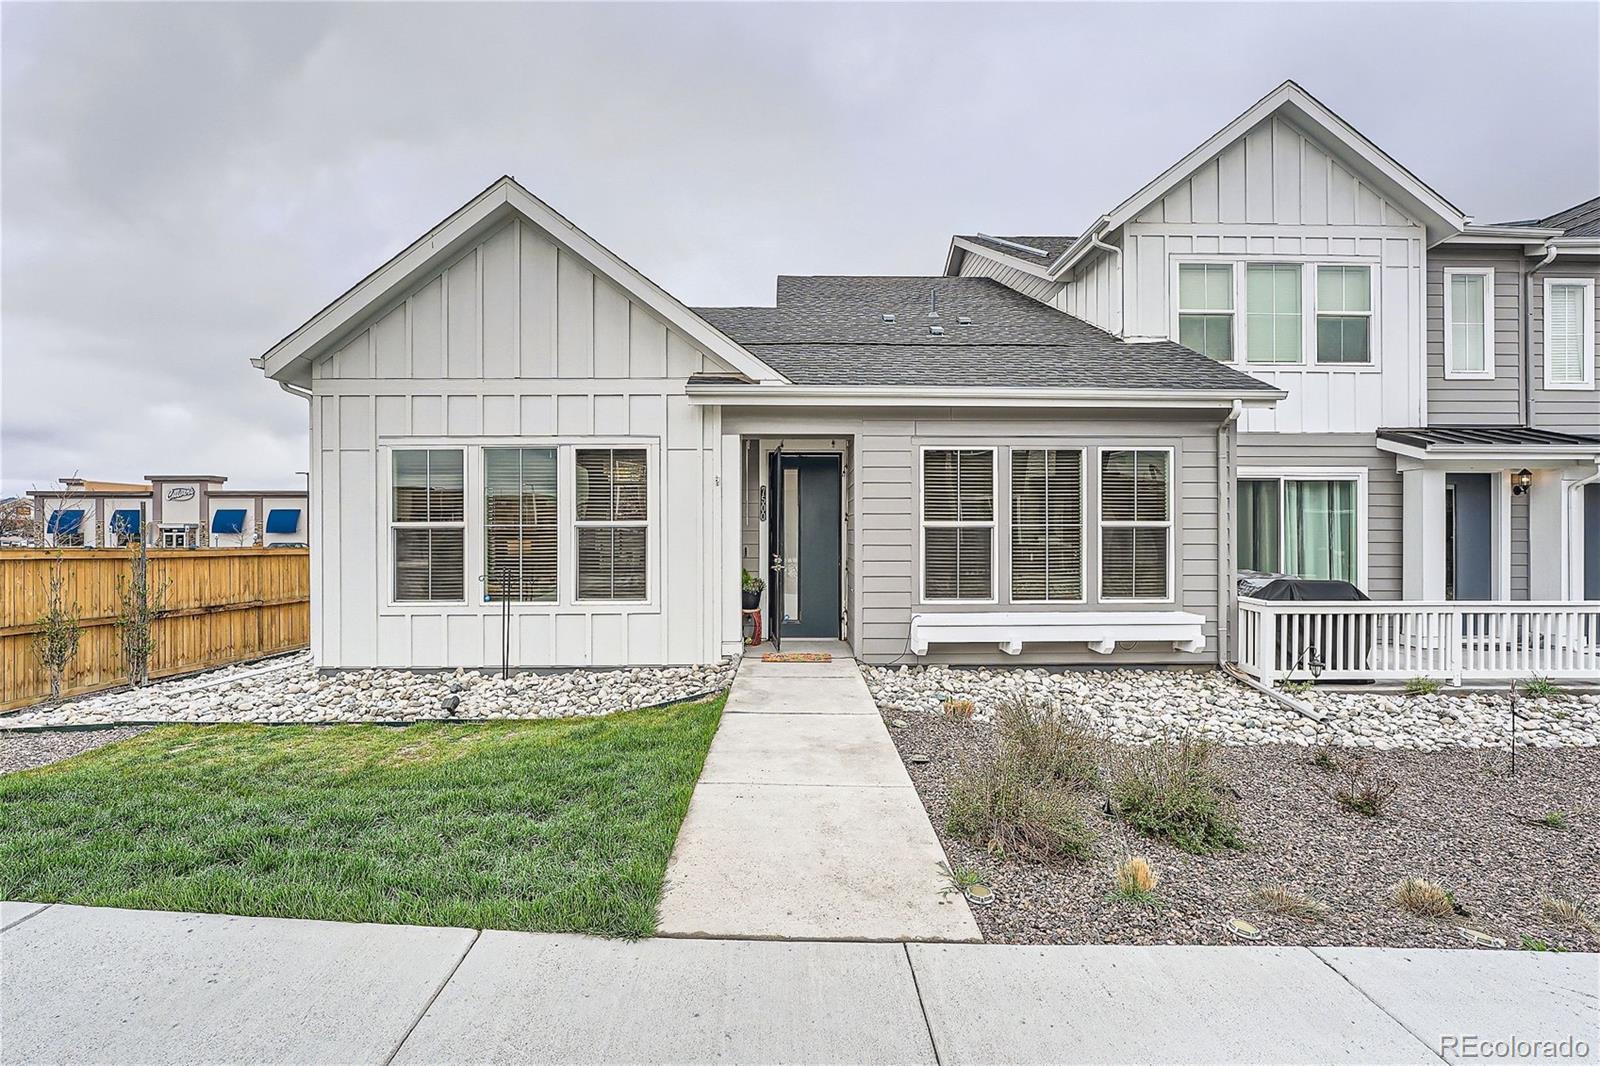 Report Image for 7500 W Pacific Lane,Lakewood, Colorado